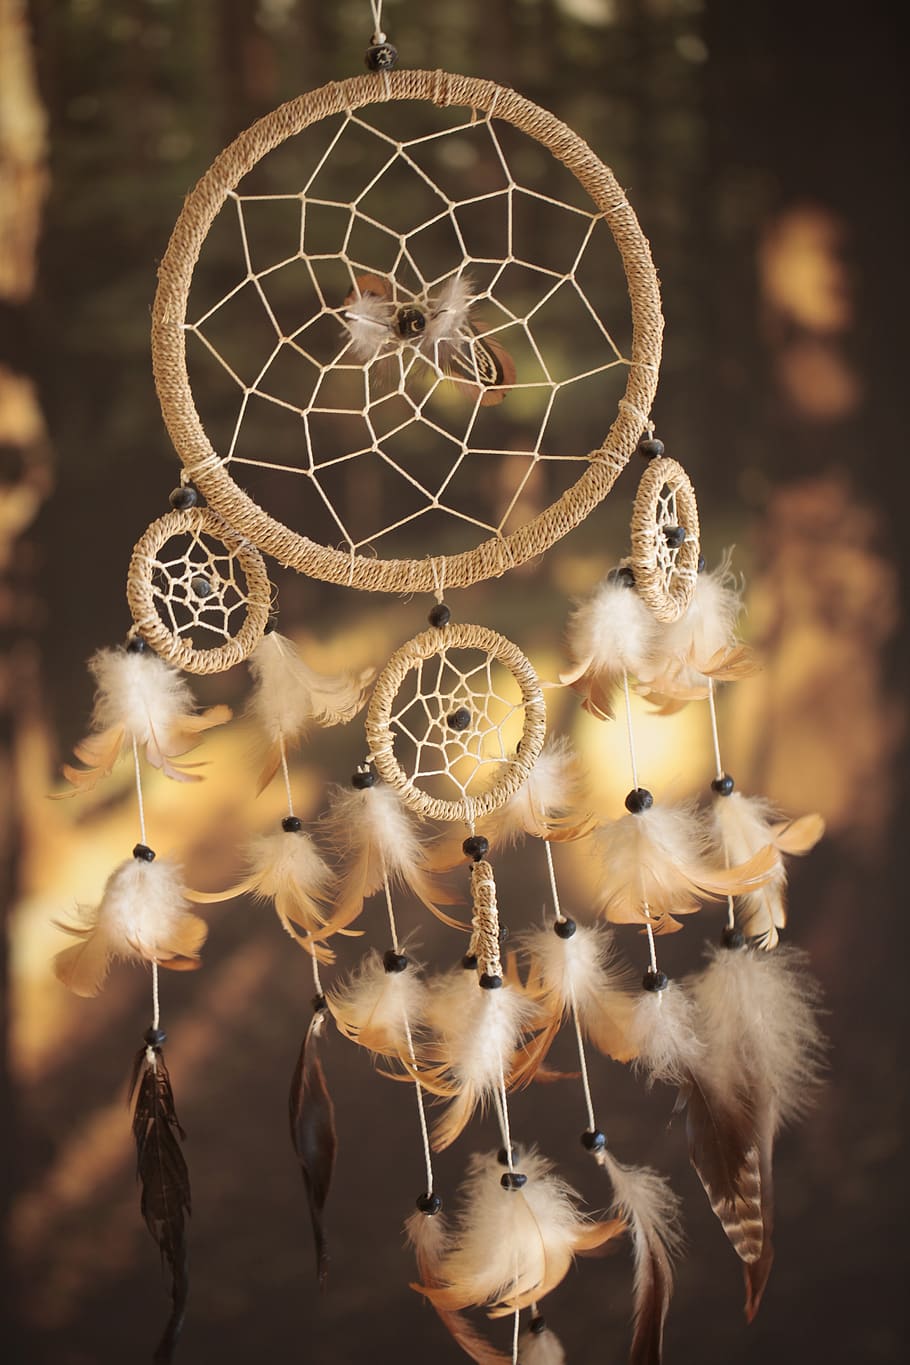 dreamcatcher, feathers, indian, magic, a dream, decoration, symbol, sleep, the spirit, focus on foreground